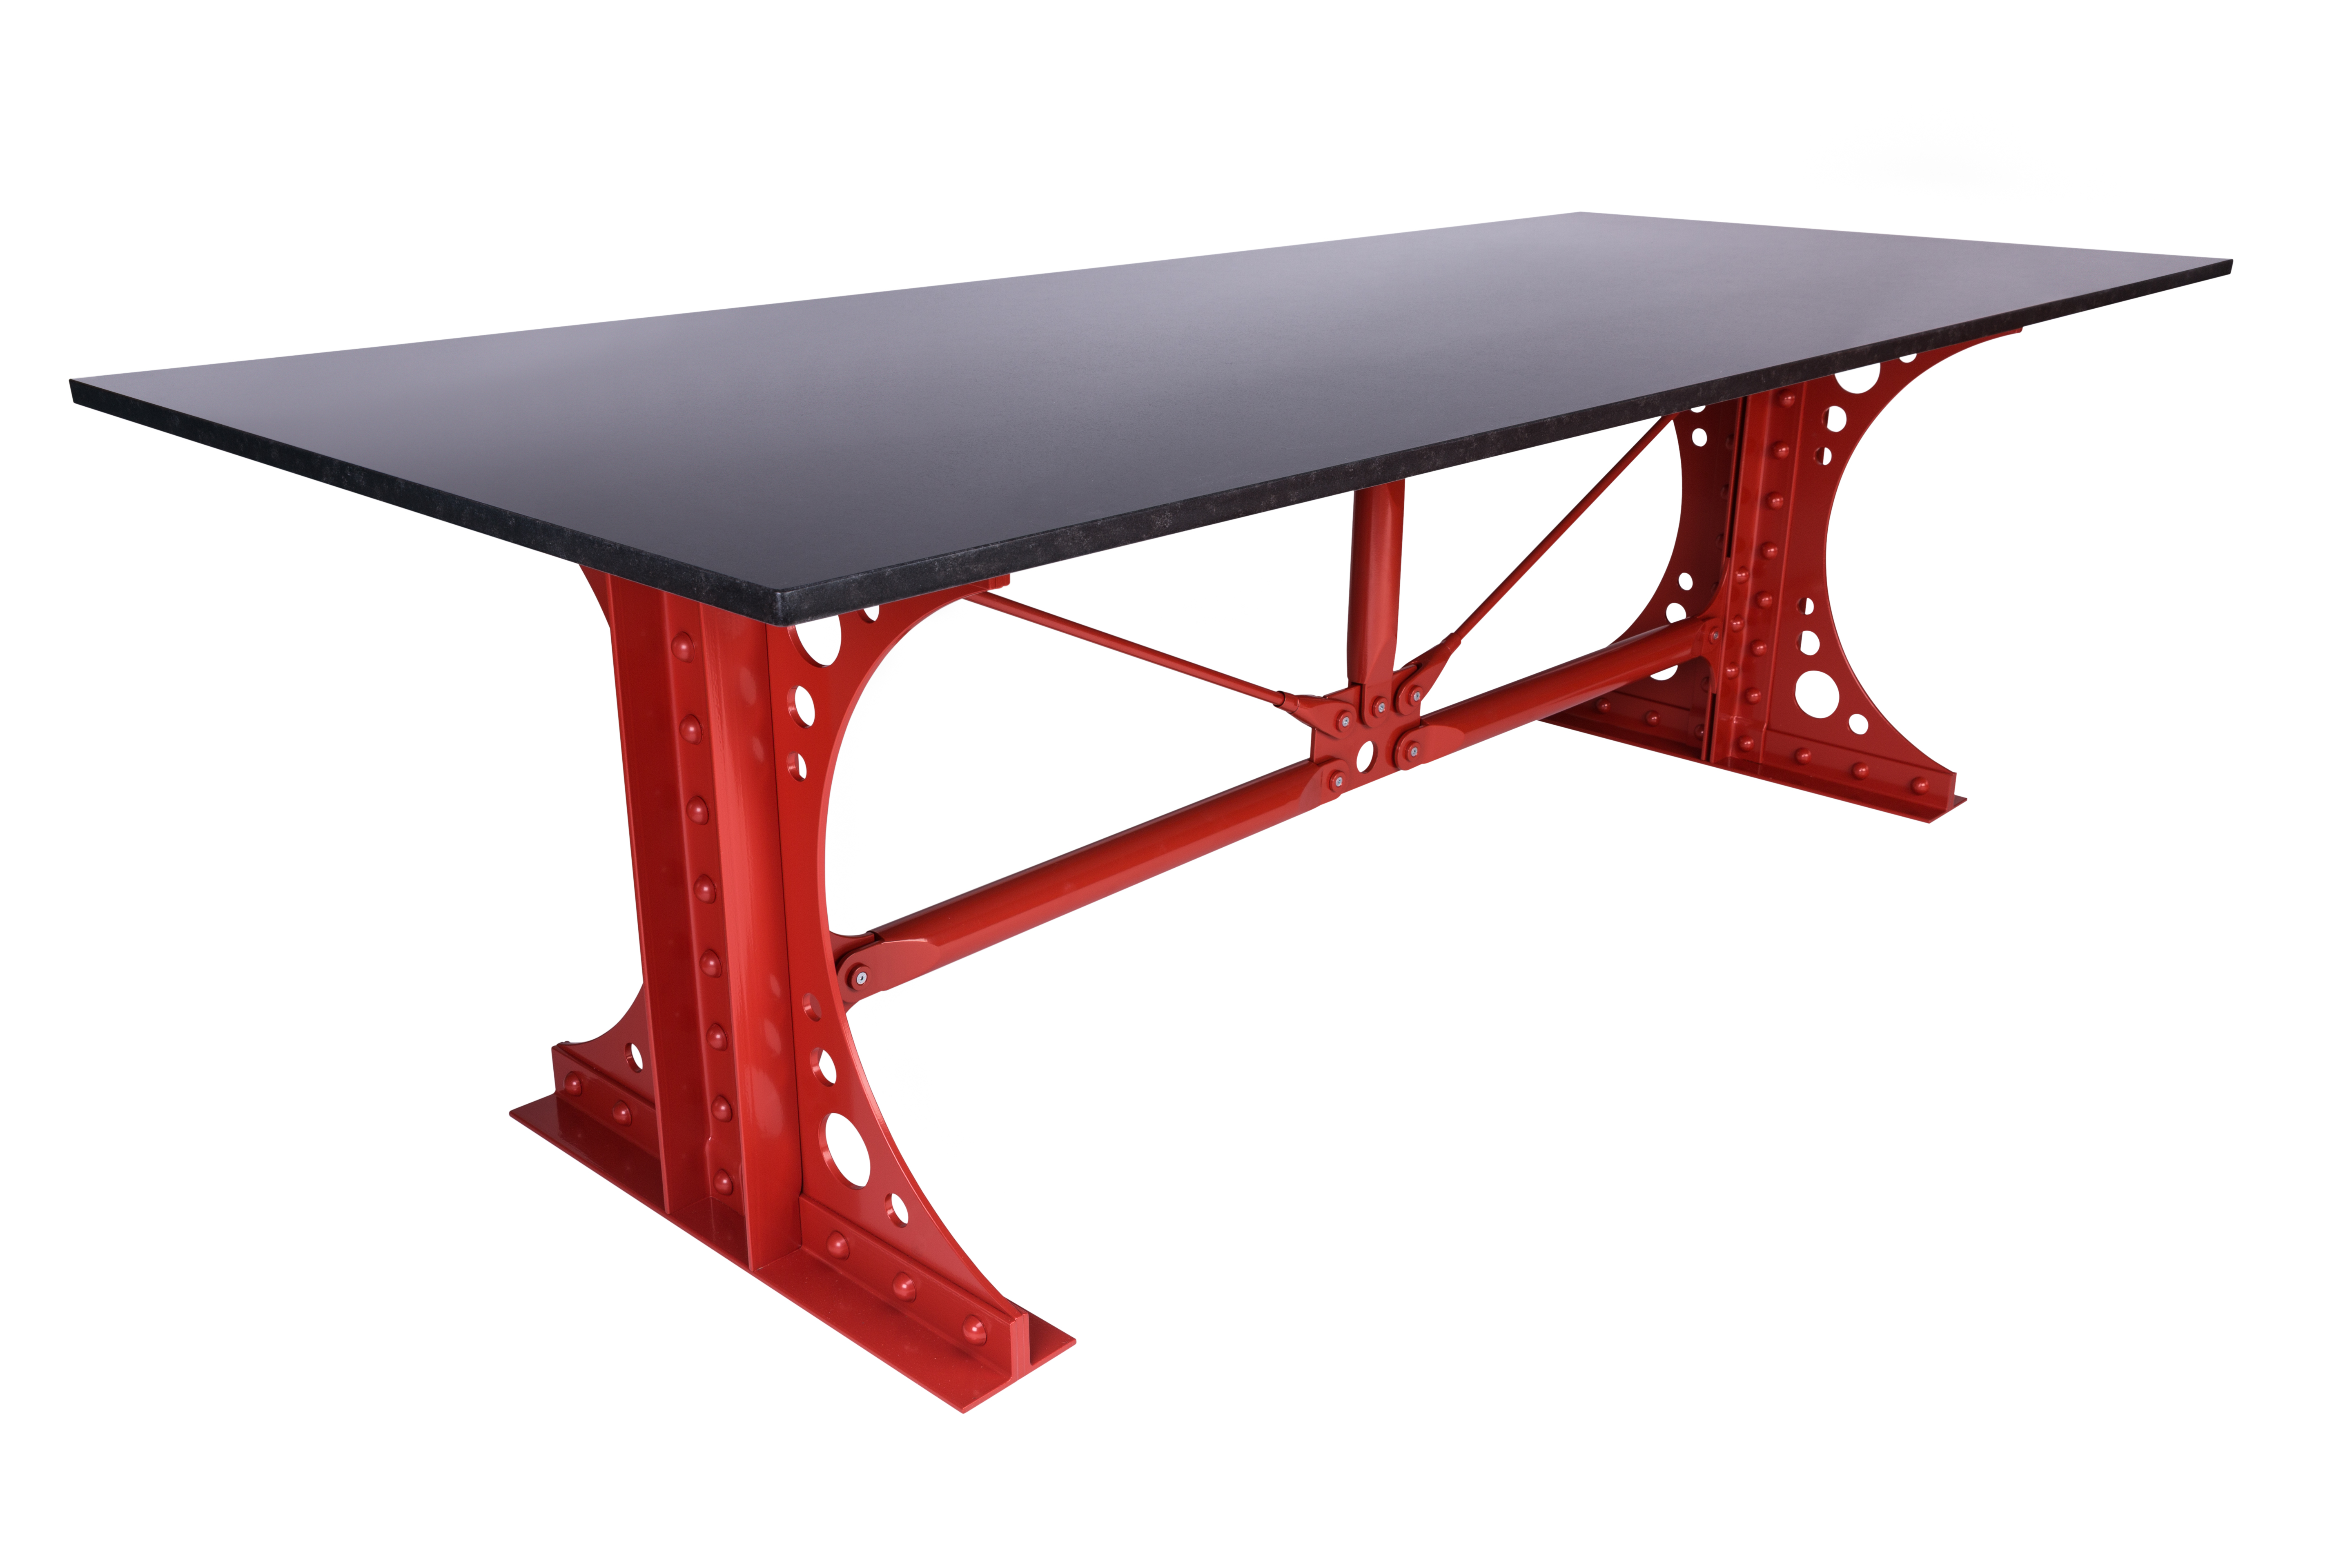 Table with tie bar structure